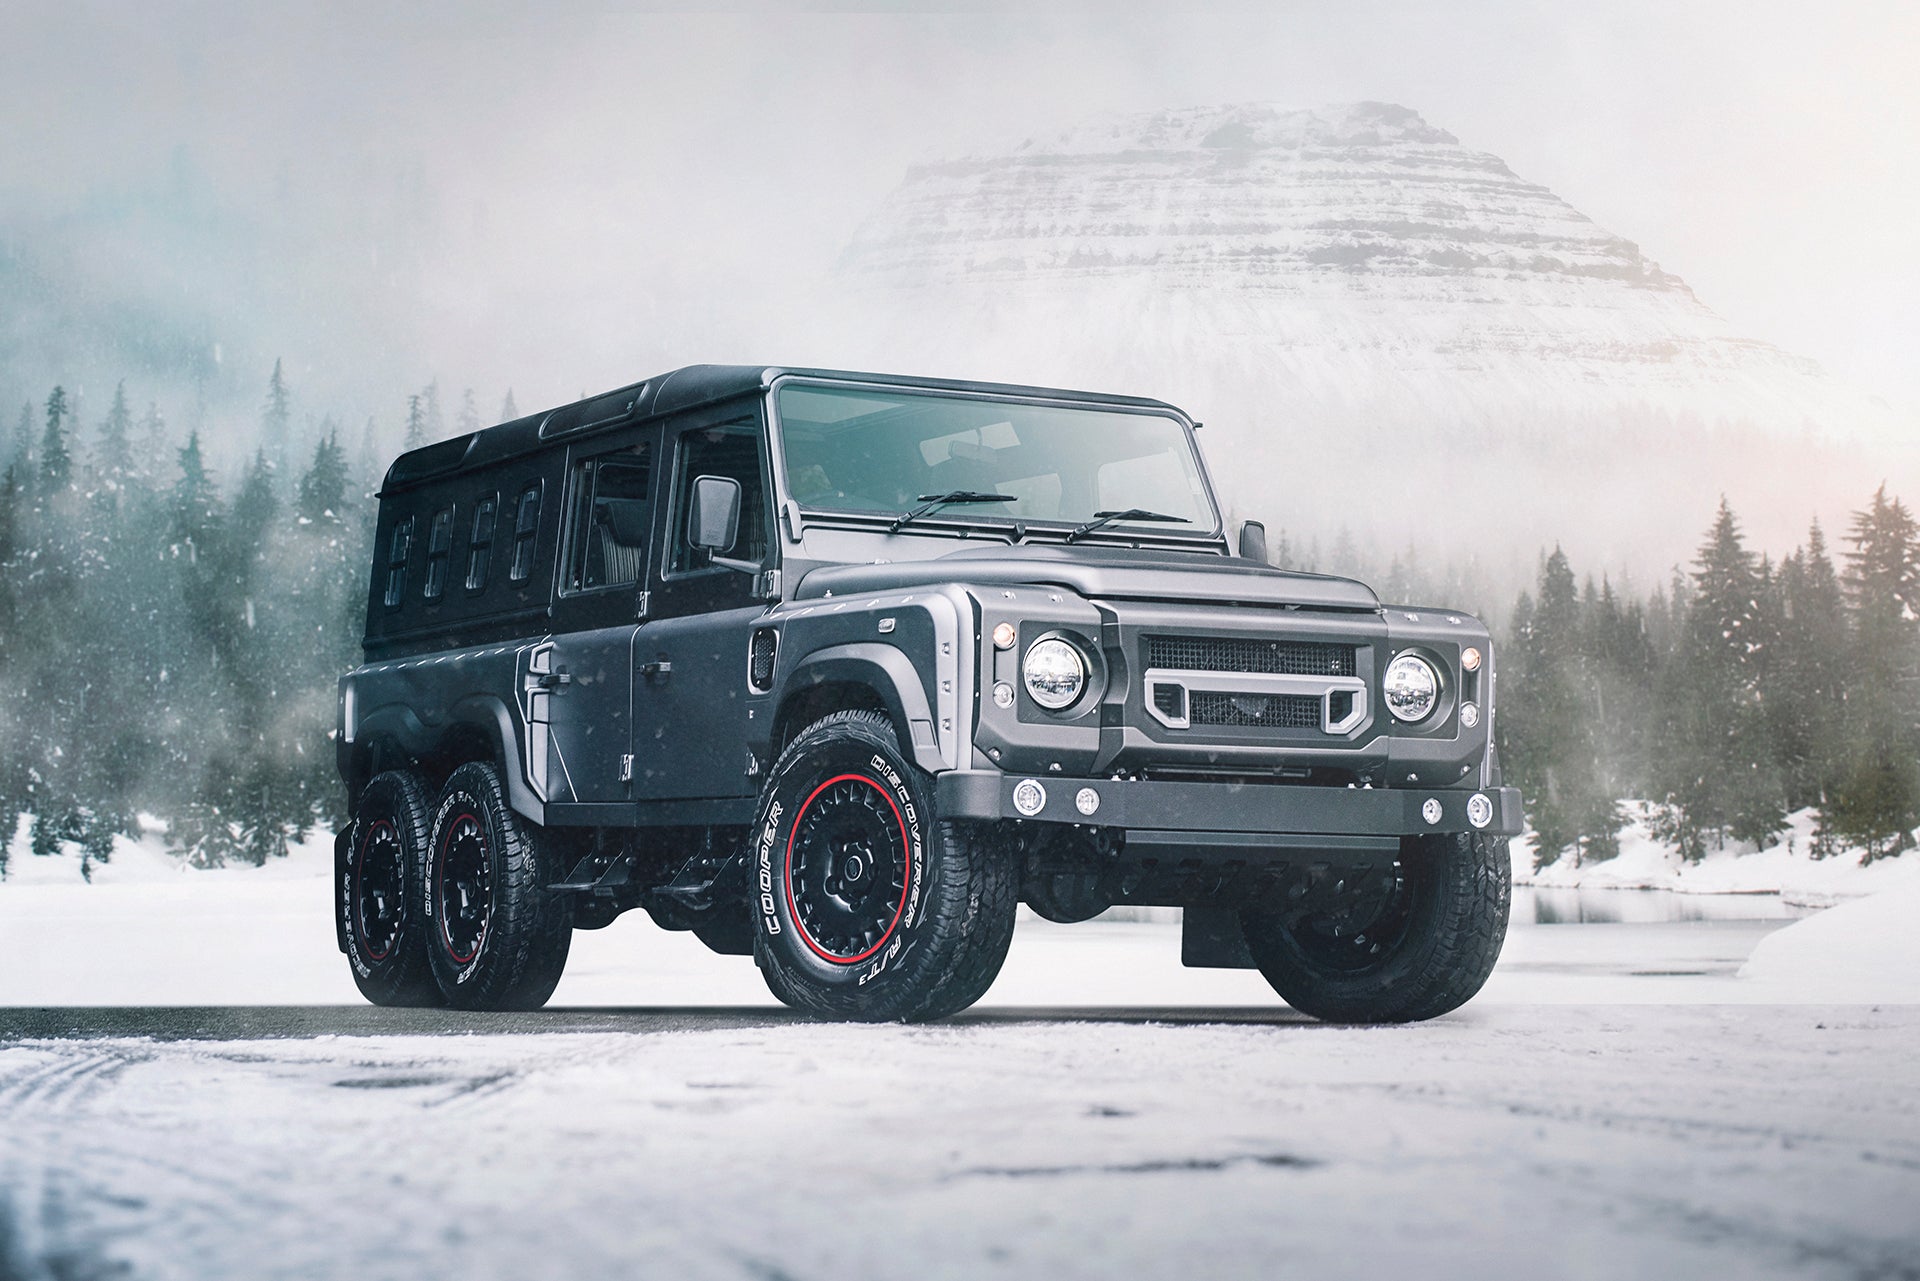 6X6 Civilian Carrier By The Chelsea Truck Company Unveiled At The 2018 Geneva Motor Show